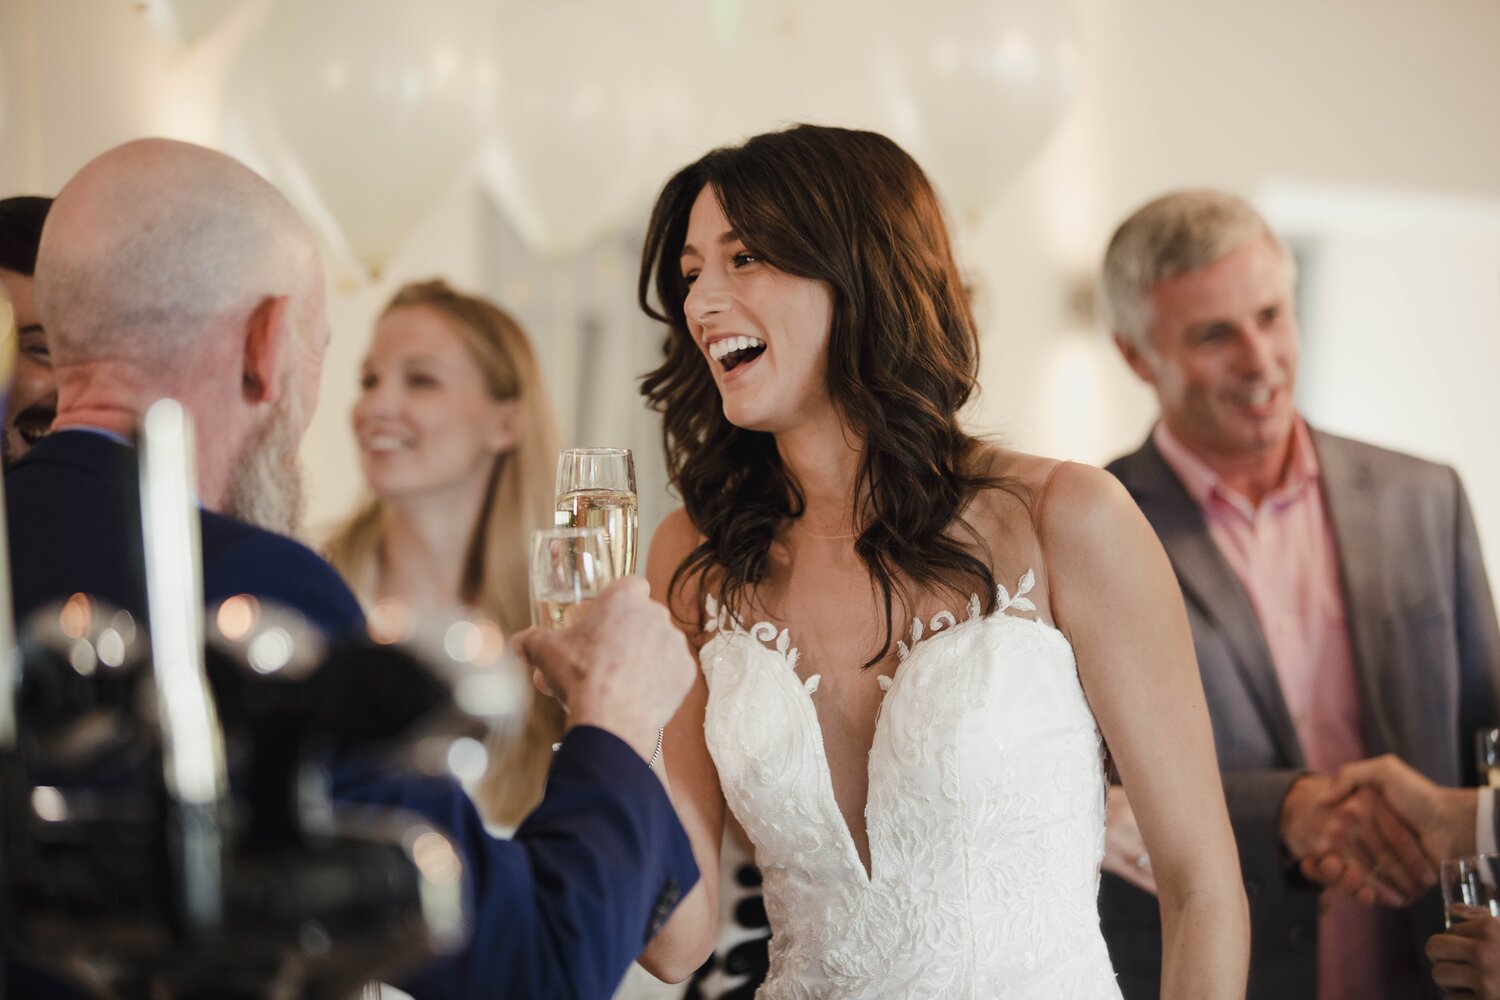 Father of the Bride Speech: 20 Tips for Writing Your Toast